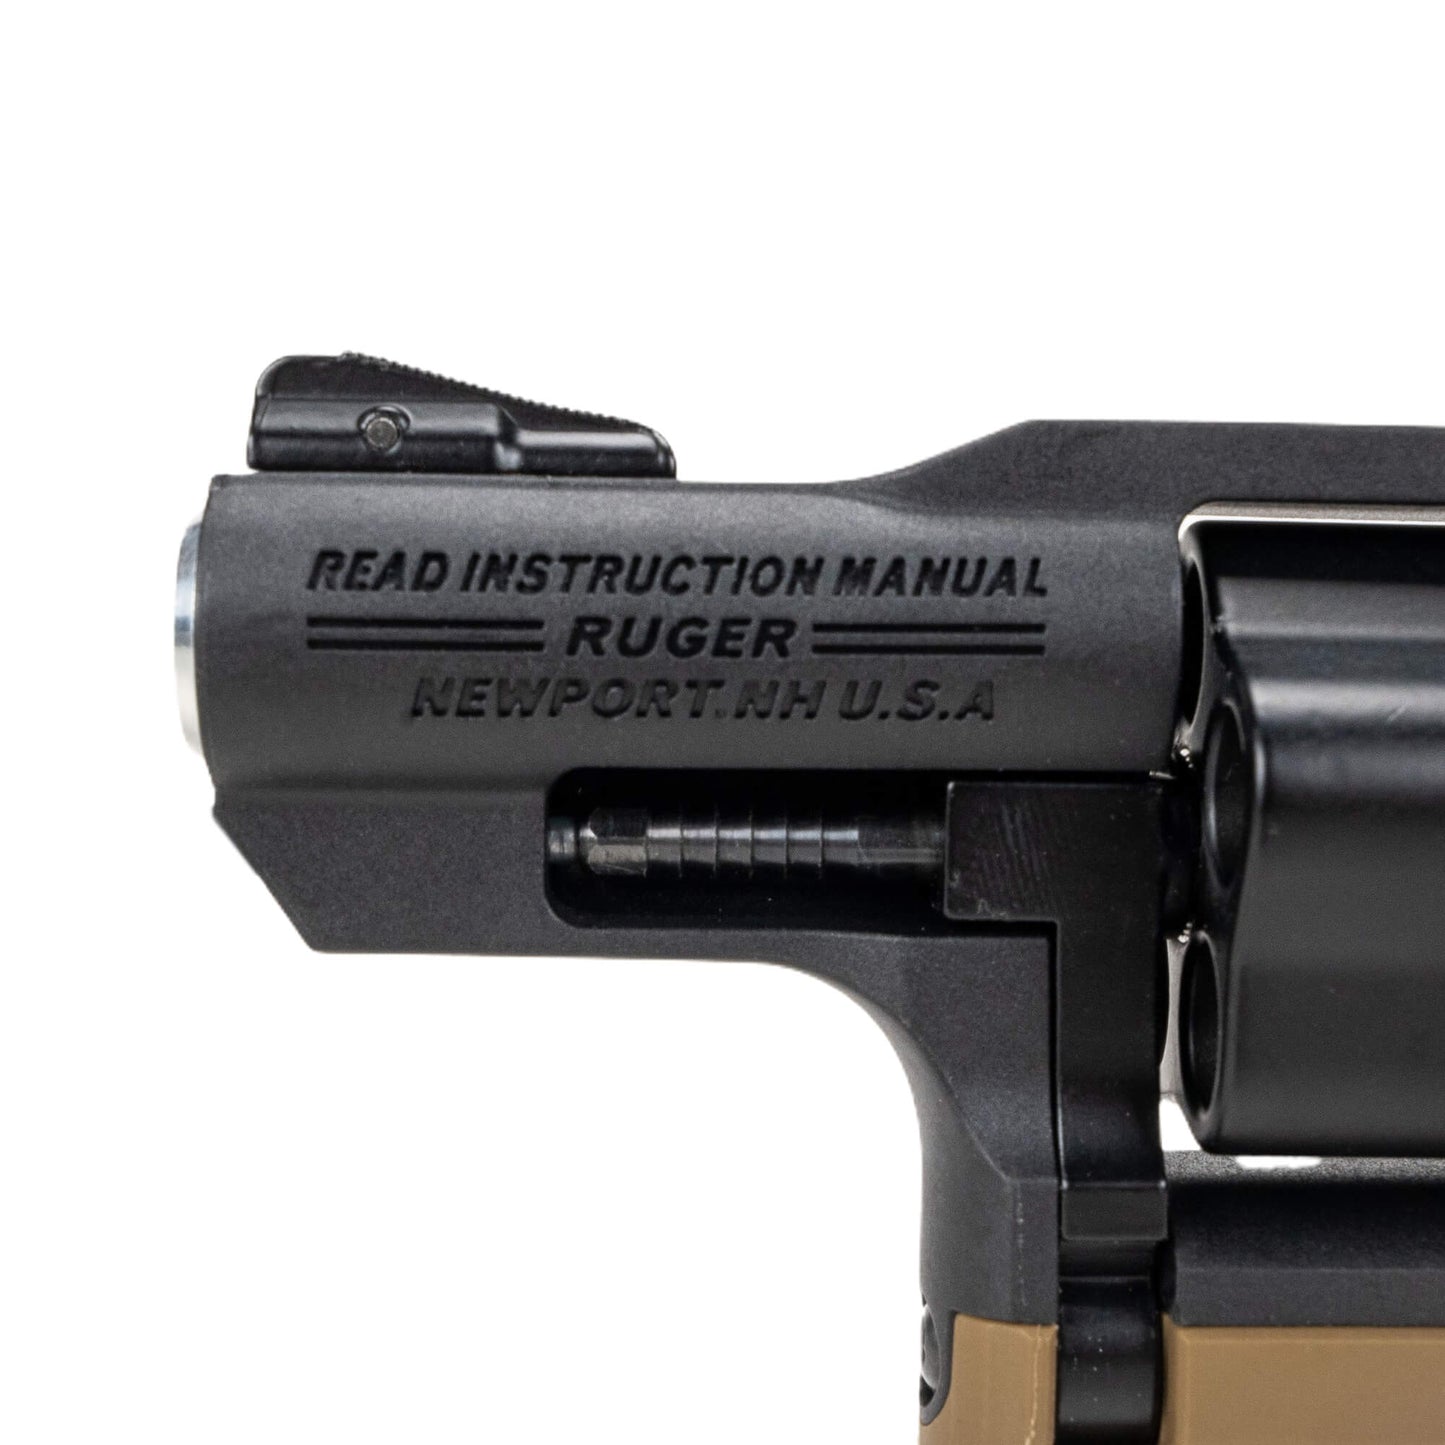 Ruger LCR Double Action Revolver Dart Blaster